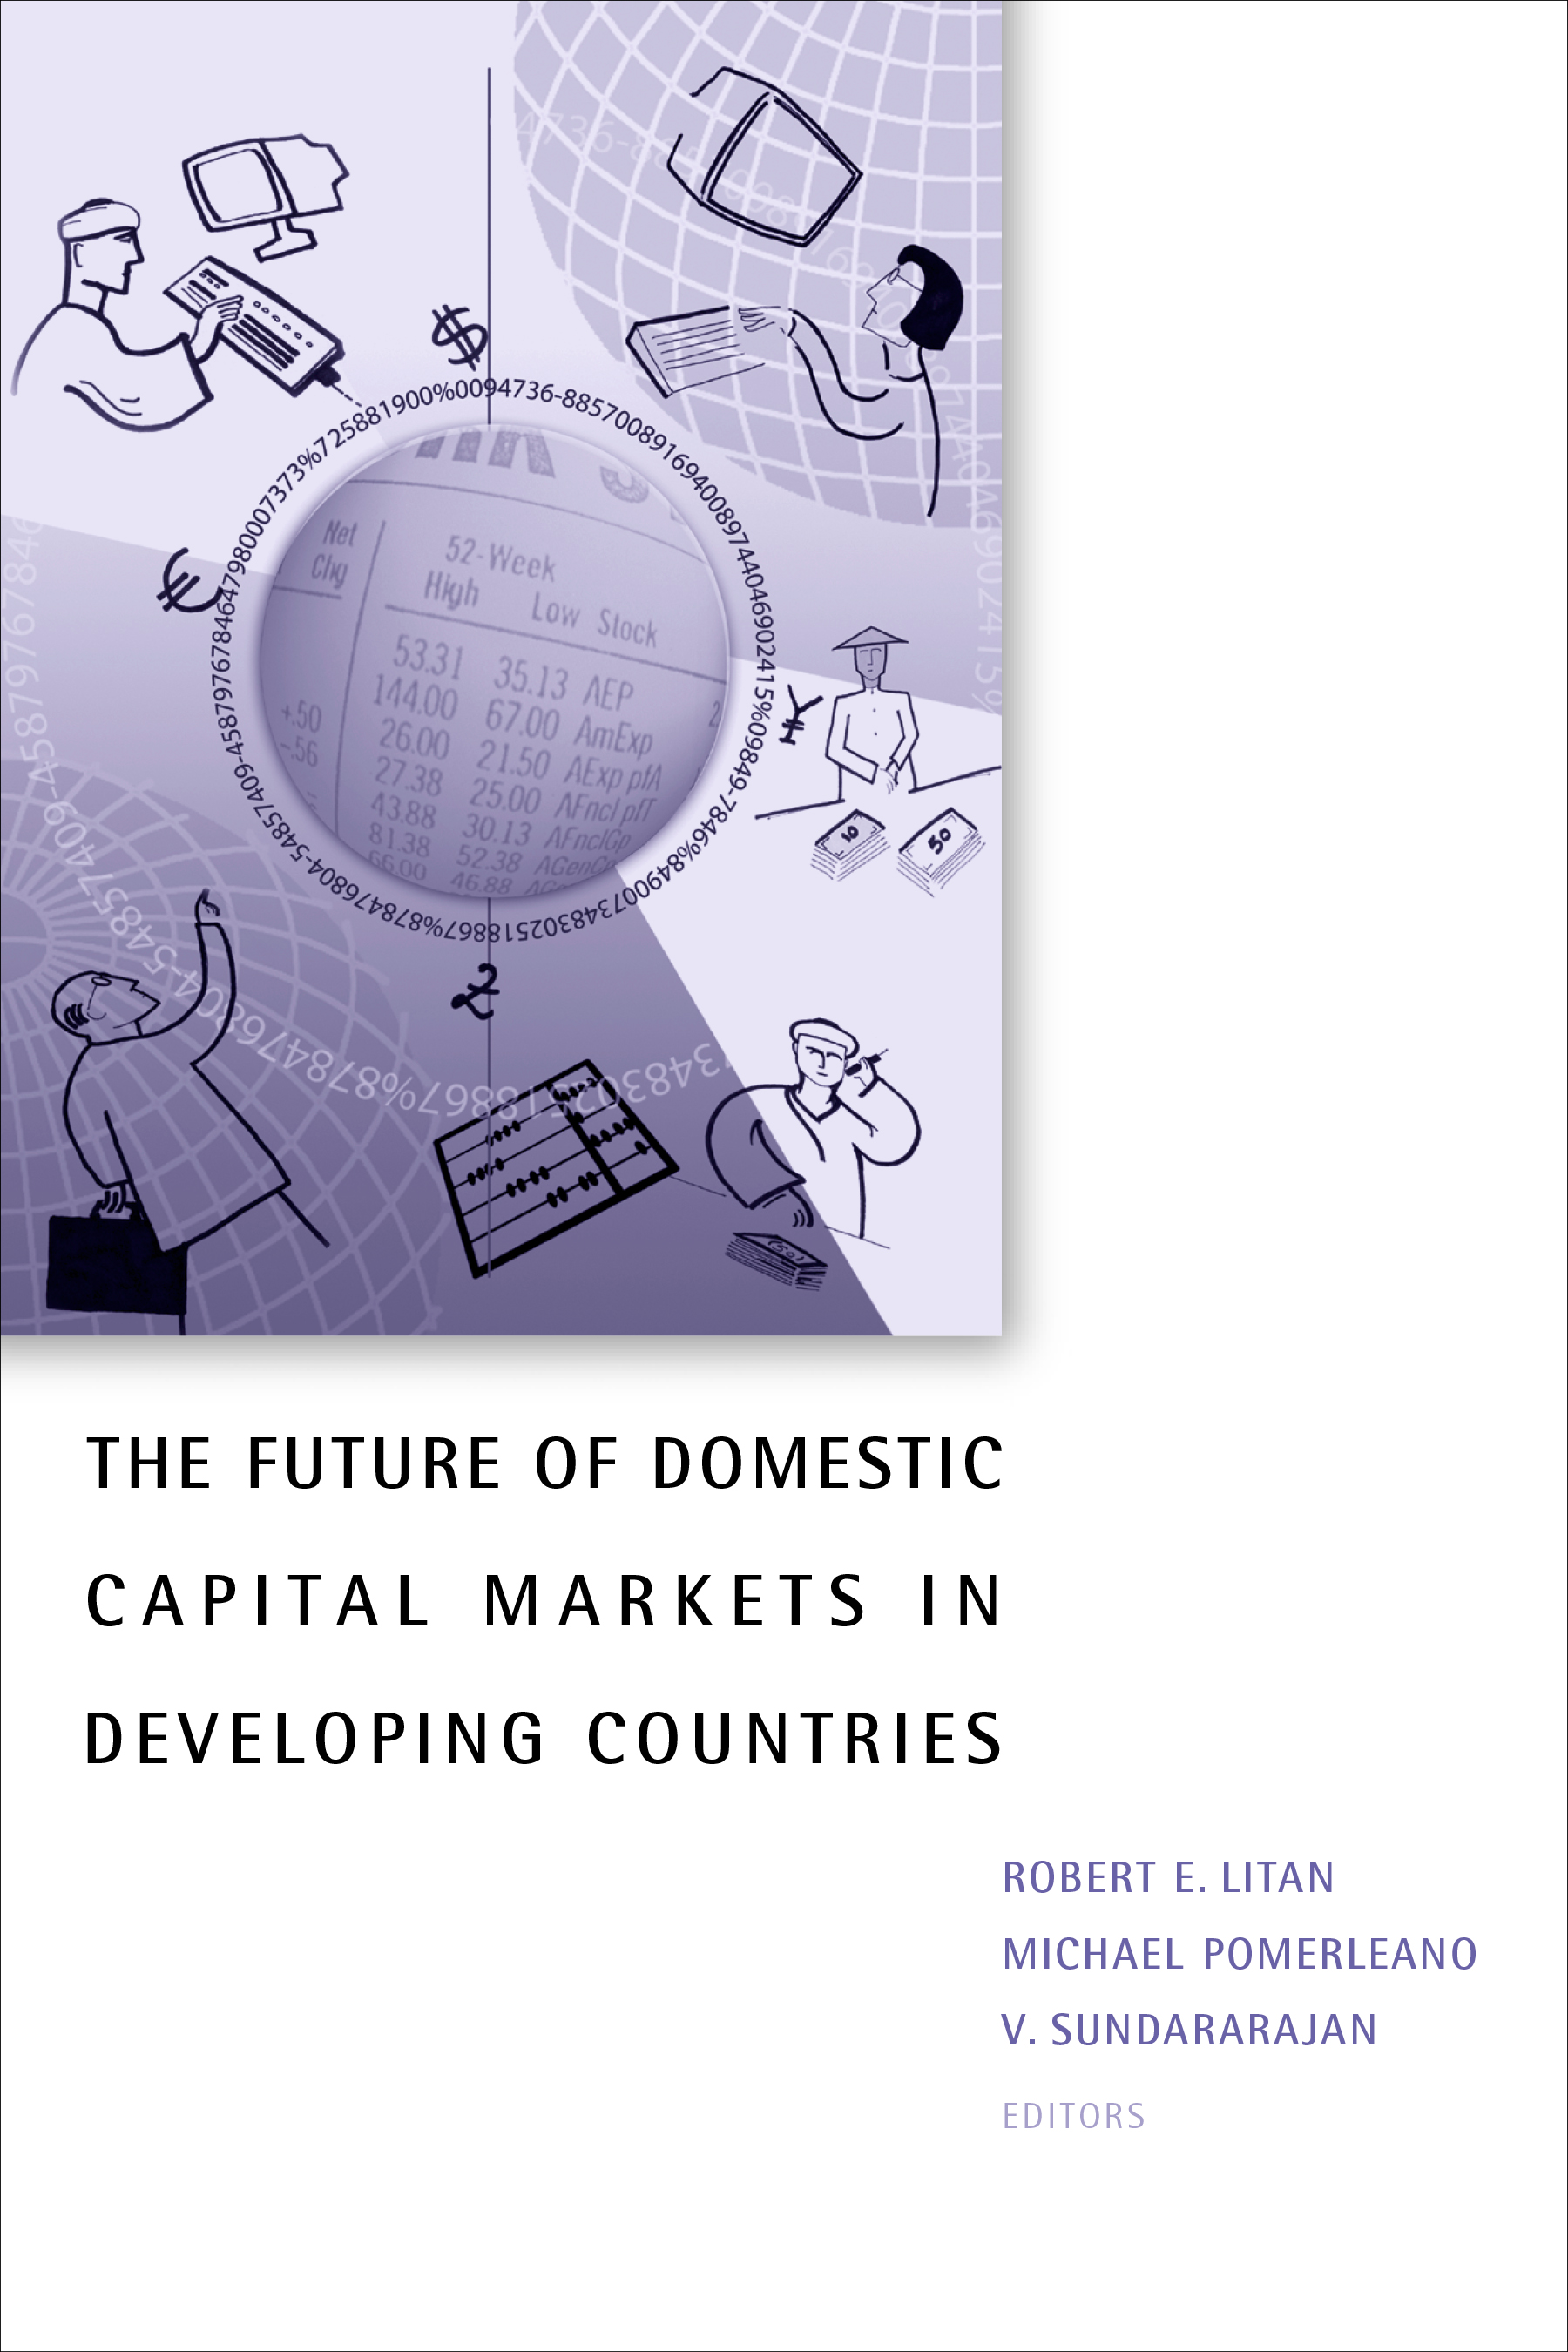 The Future of Domestic Capital Markets in Developing Countries